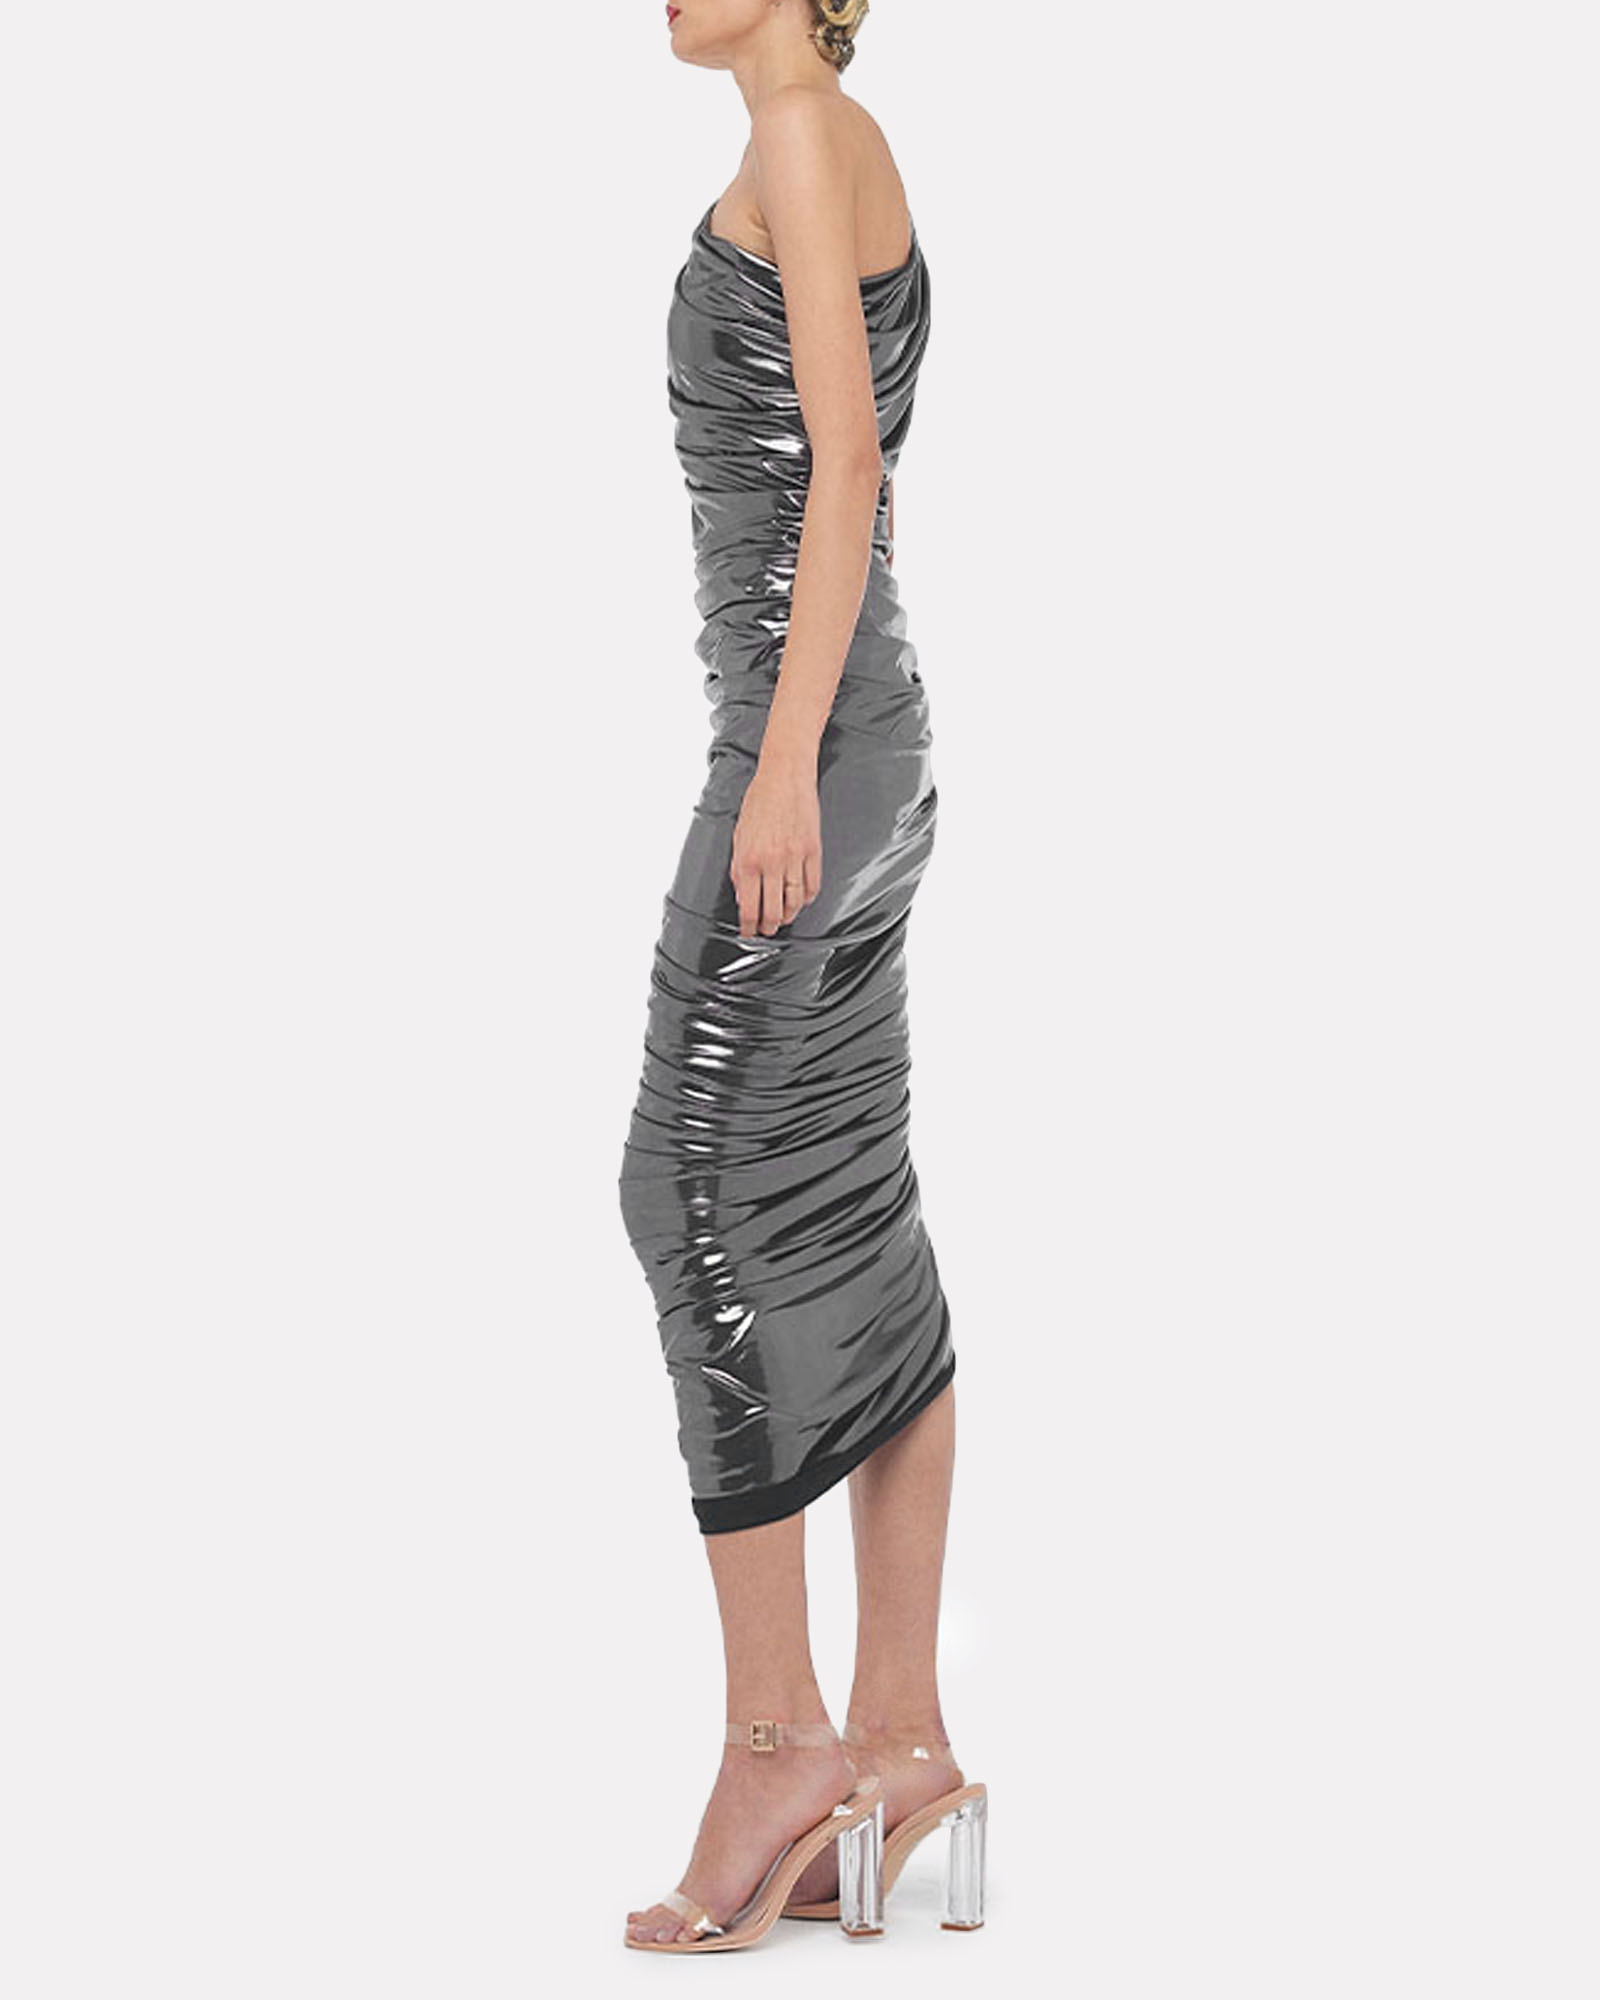 Norma Kamali Diana Ruched One-Shoulder Dress in Silver | INTERMIX®